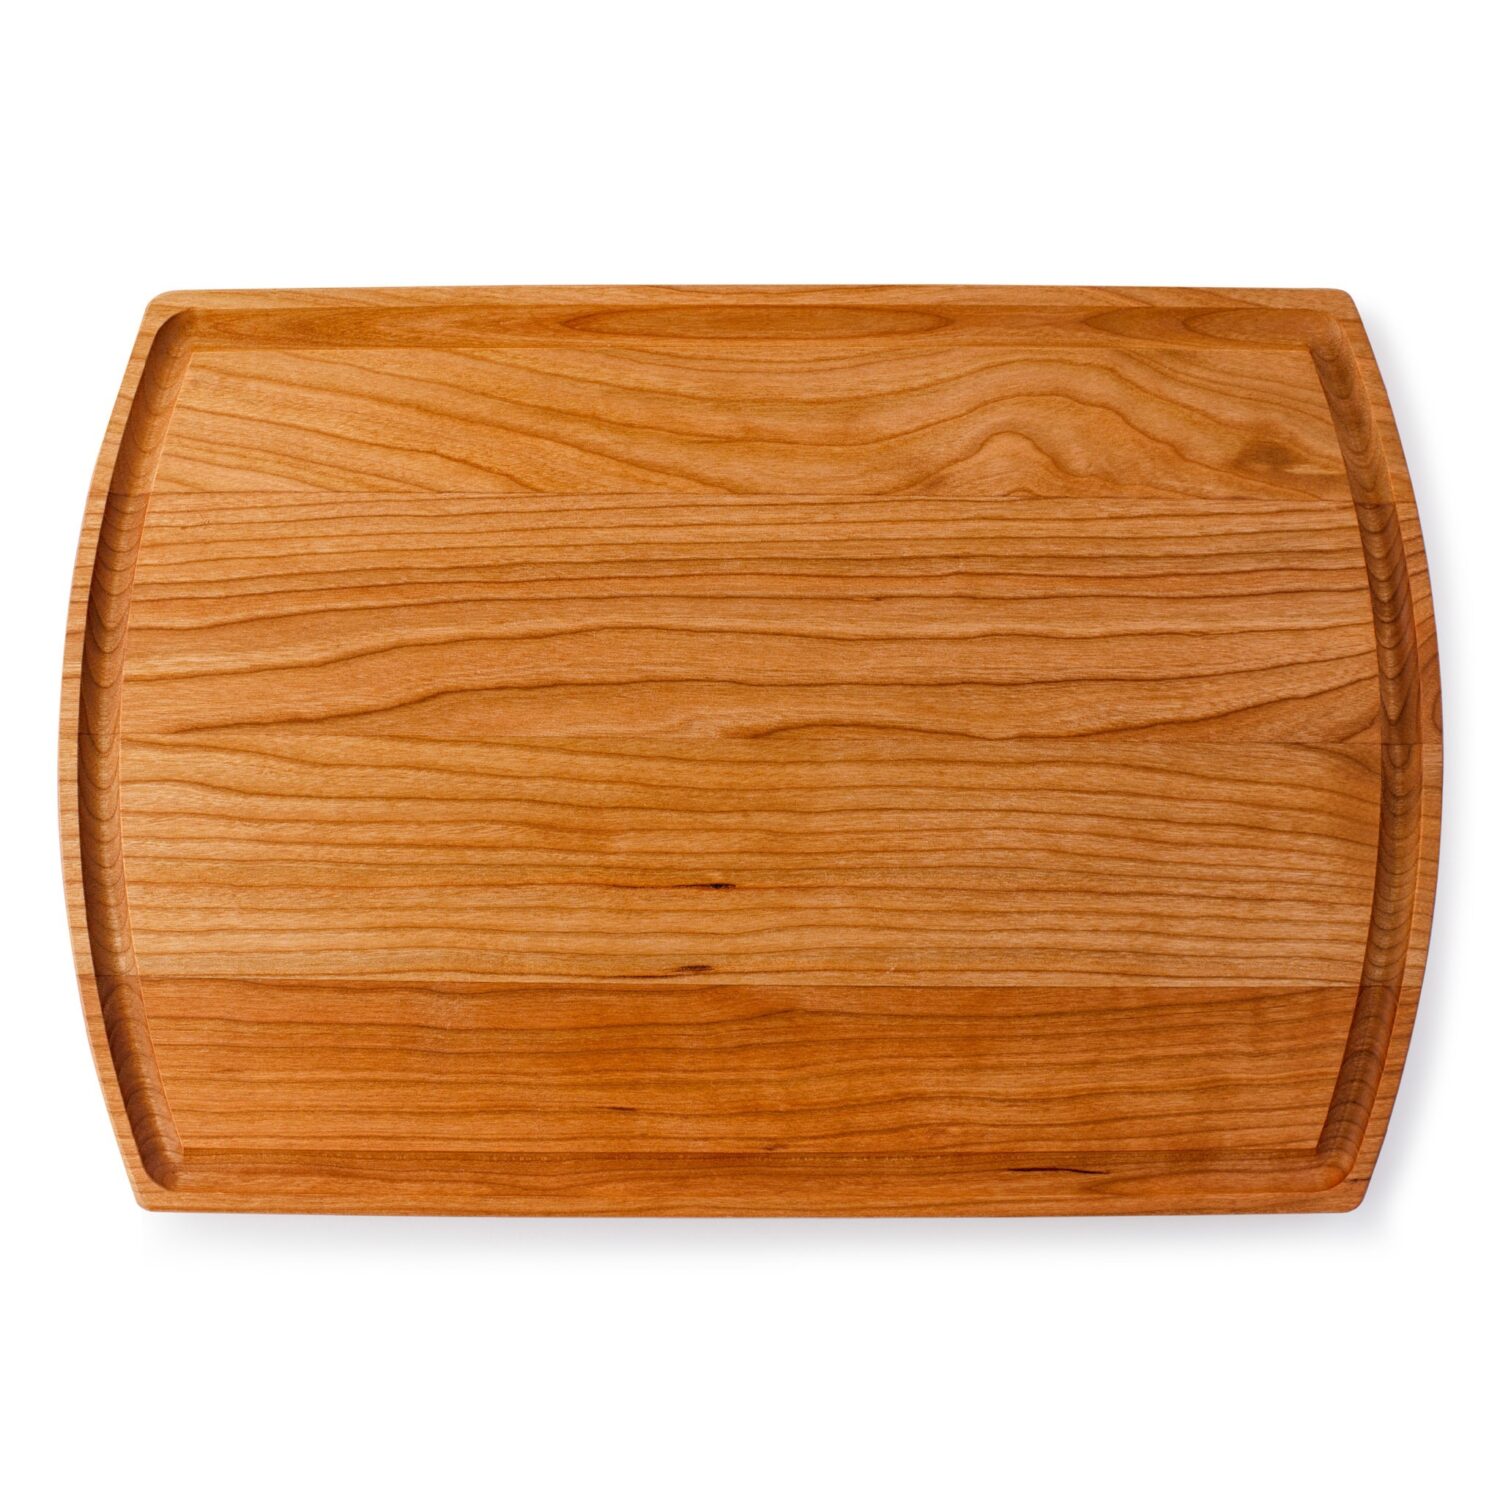 A rustic wooden chopping board on a white background.